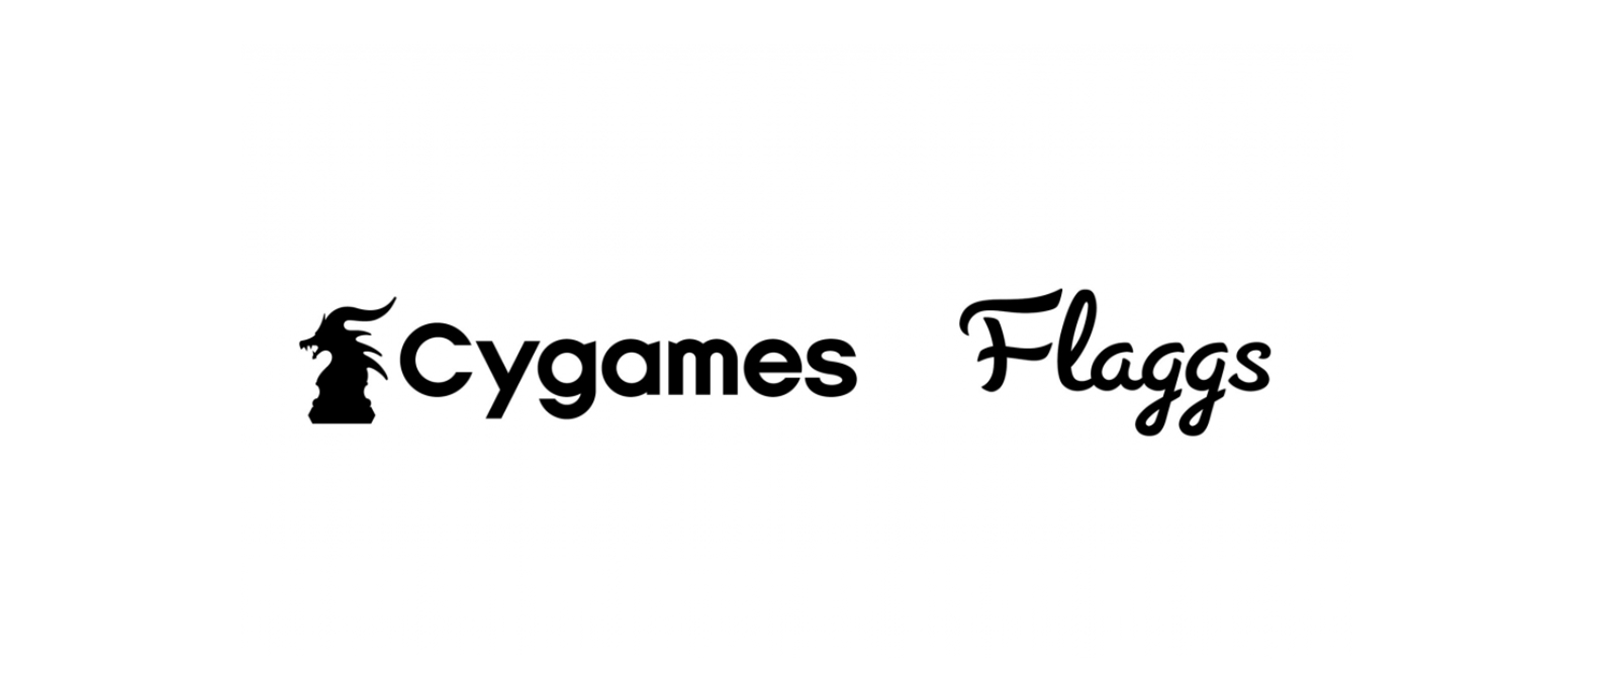 Cygames acquires Japanese game studio flaggs & aims to strengthen the foundation for content creation